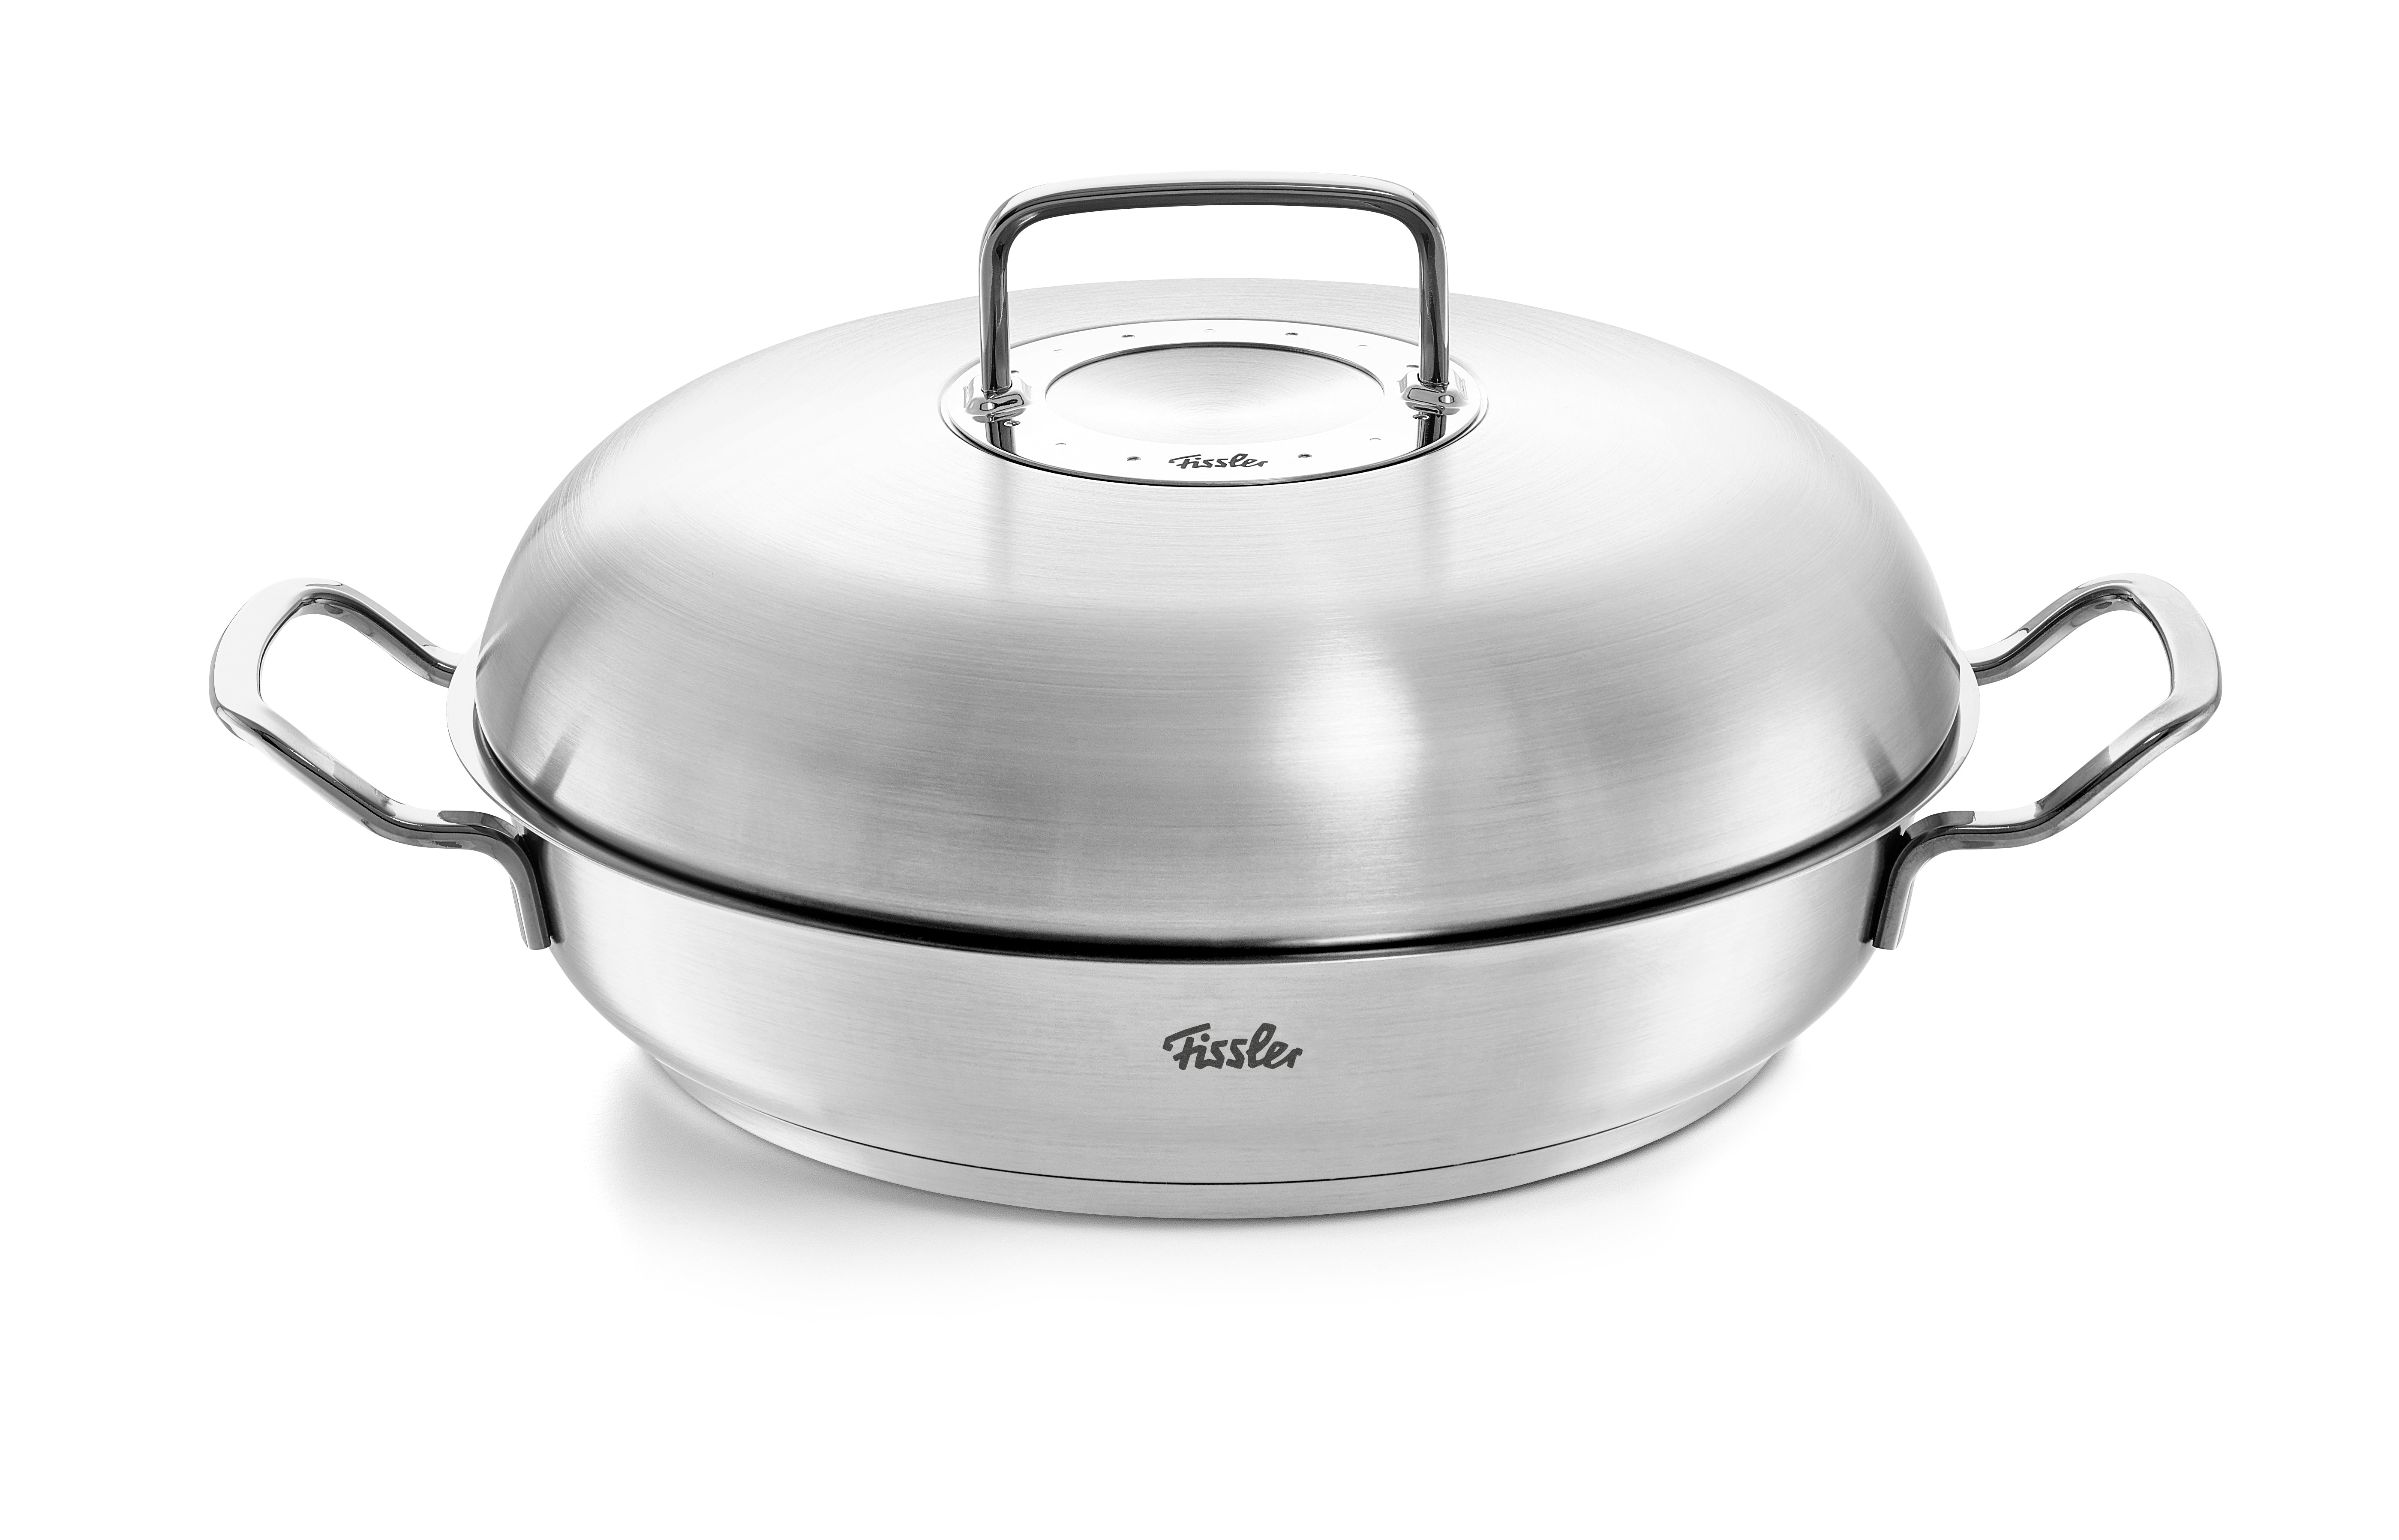 Fissler - Original-Profi Collection® Stainless Steel Serving Pan with High Dome Lid - 11 Inch